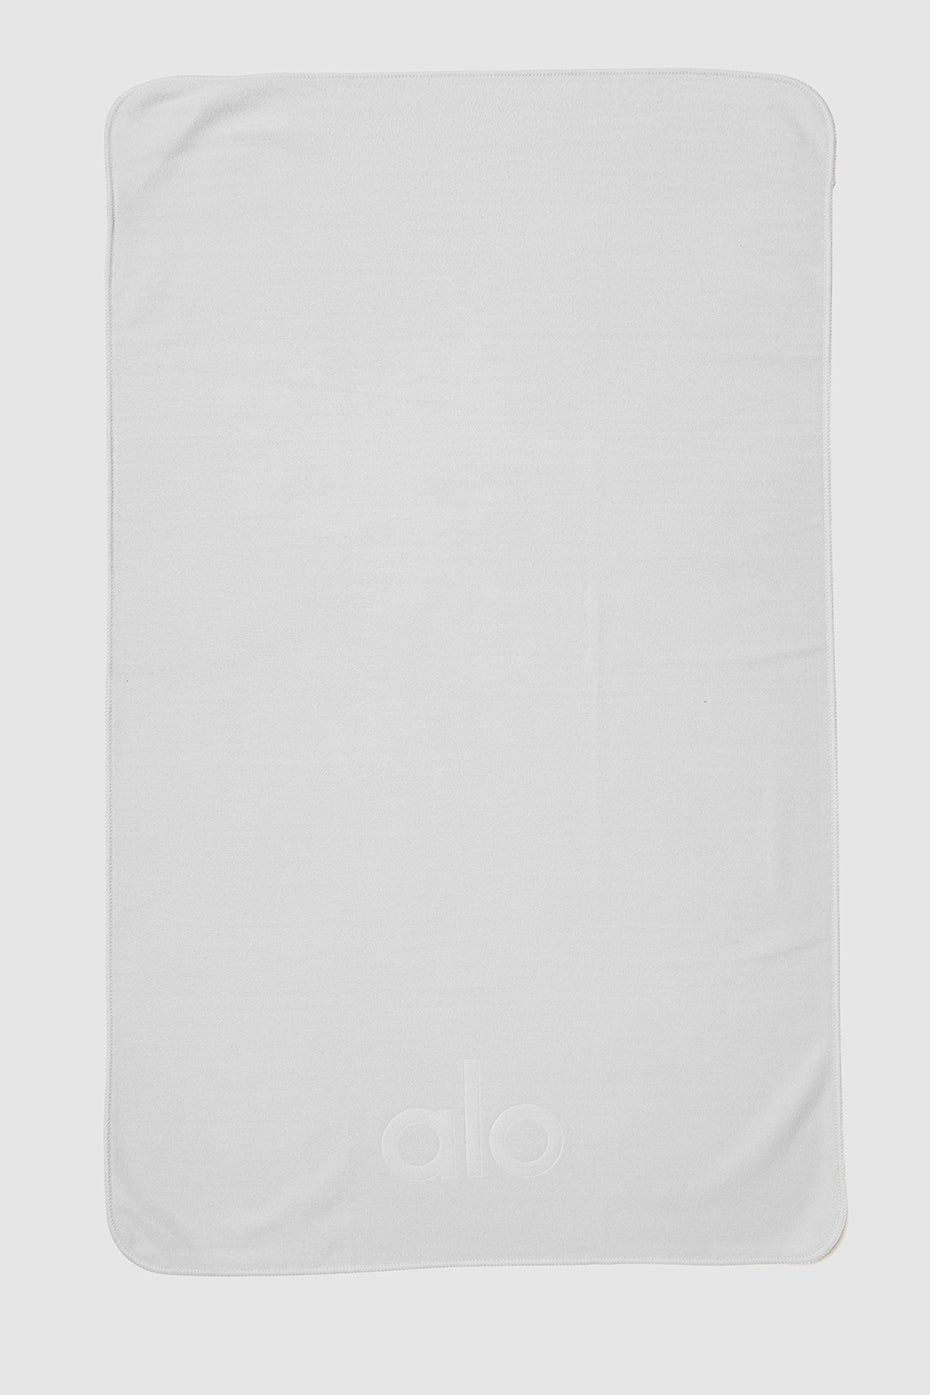 Grounded No-Slip Towel in Powder Pink by Alo Yoga - Work Well Daily